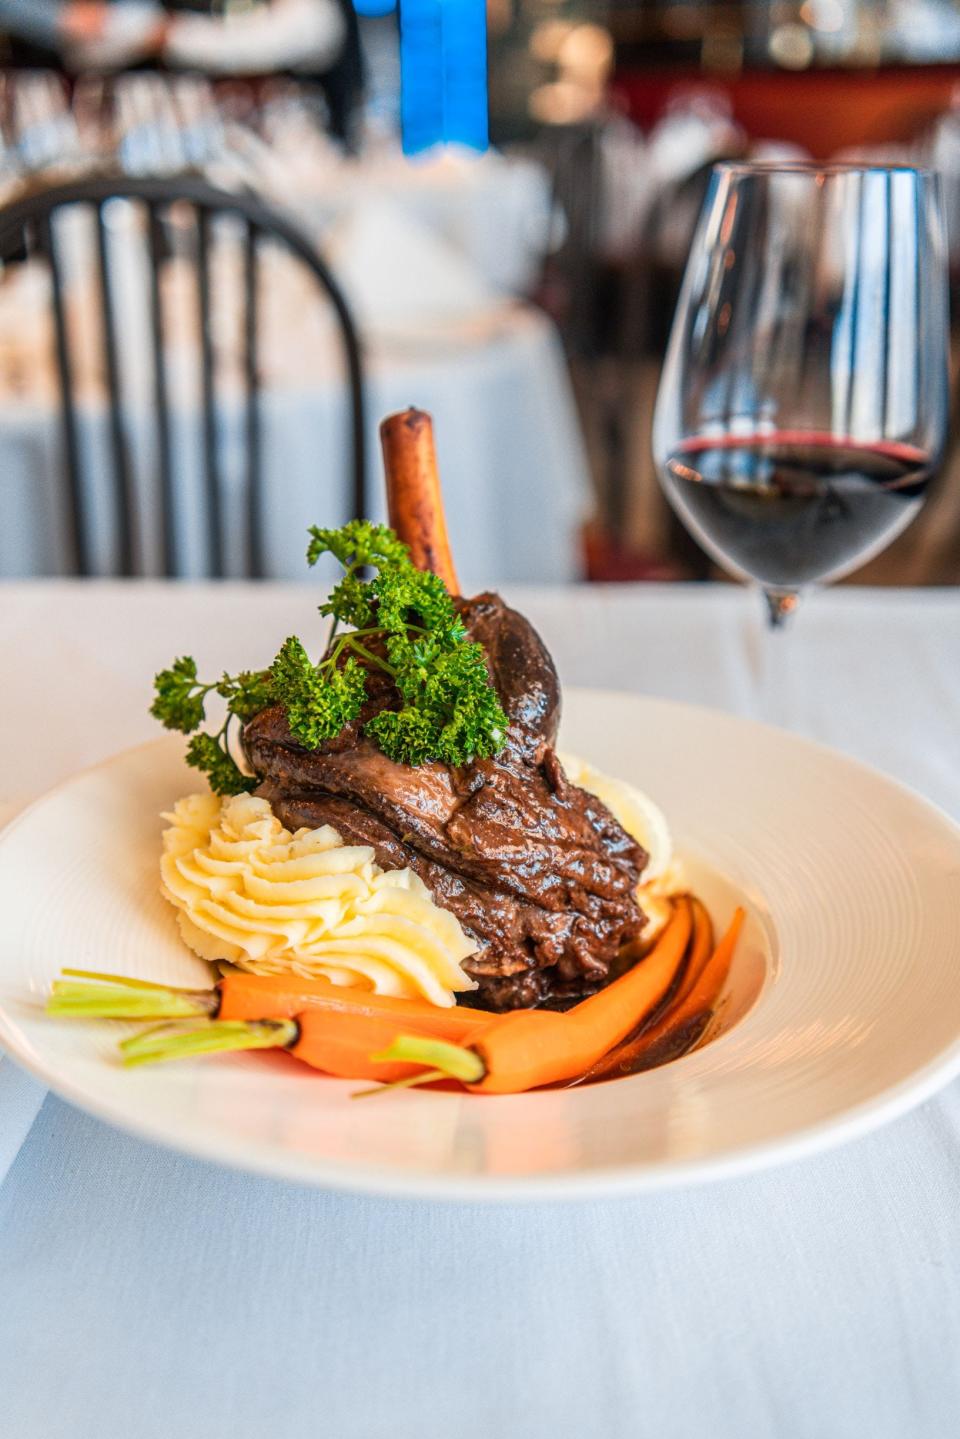 Treat dad to the domestic braised lamb shank in red wine sauce with Yukon gold mashed potatoes at La Goulue for Father's Day.